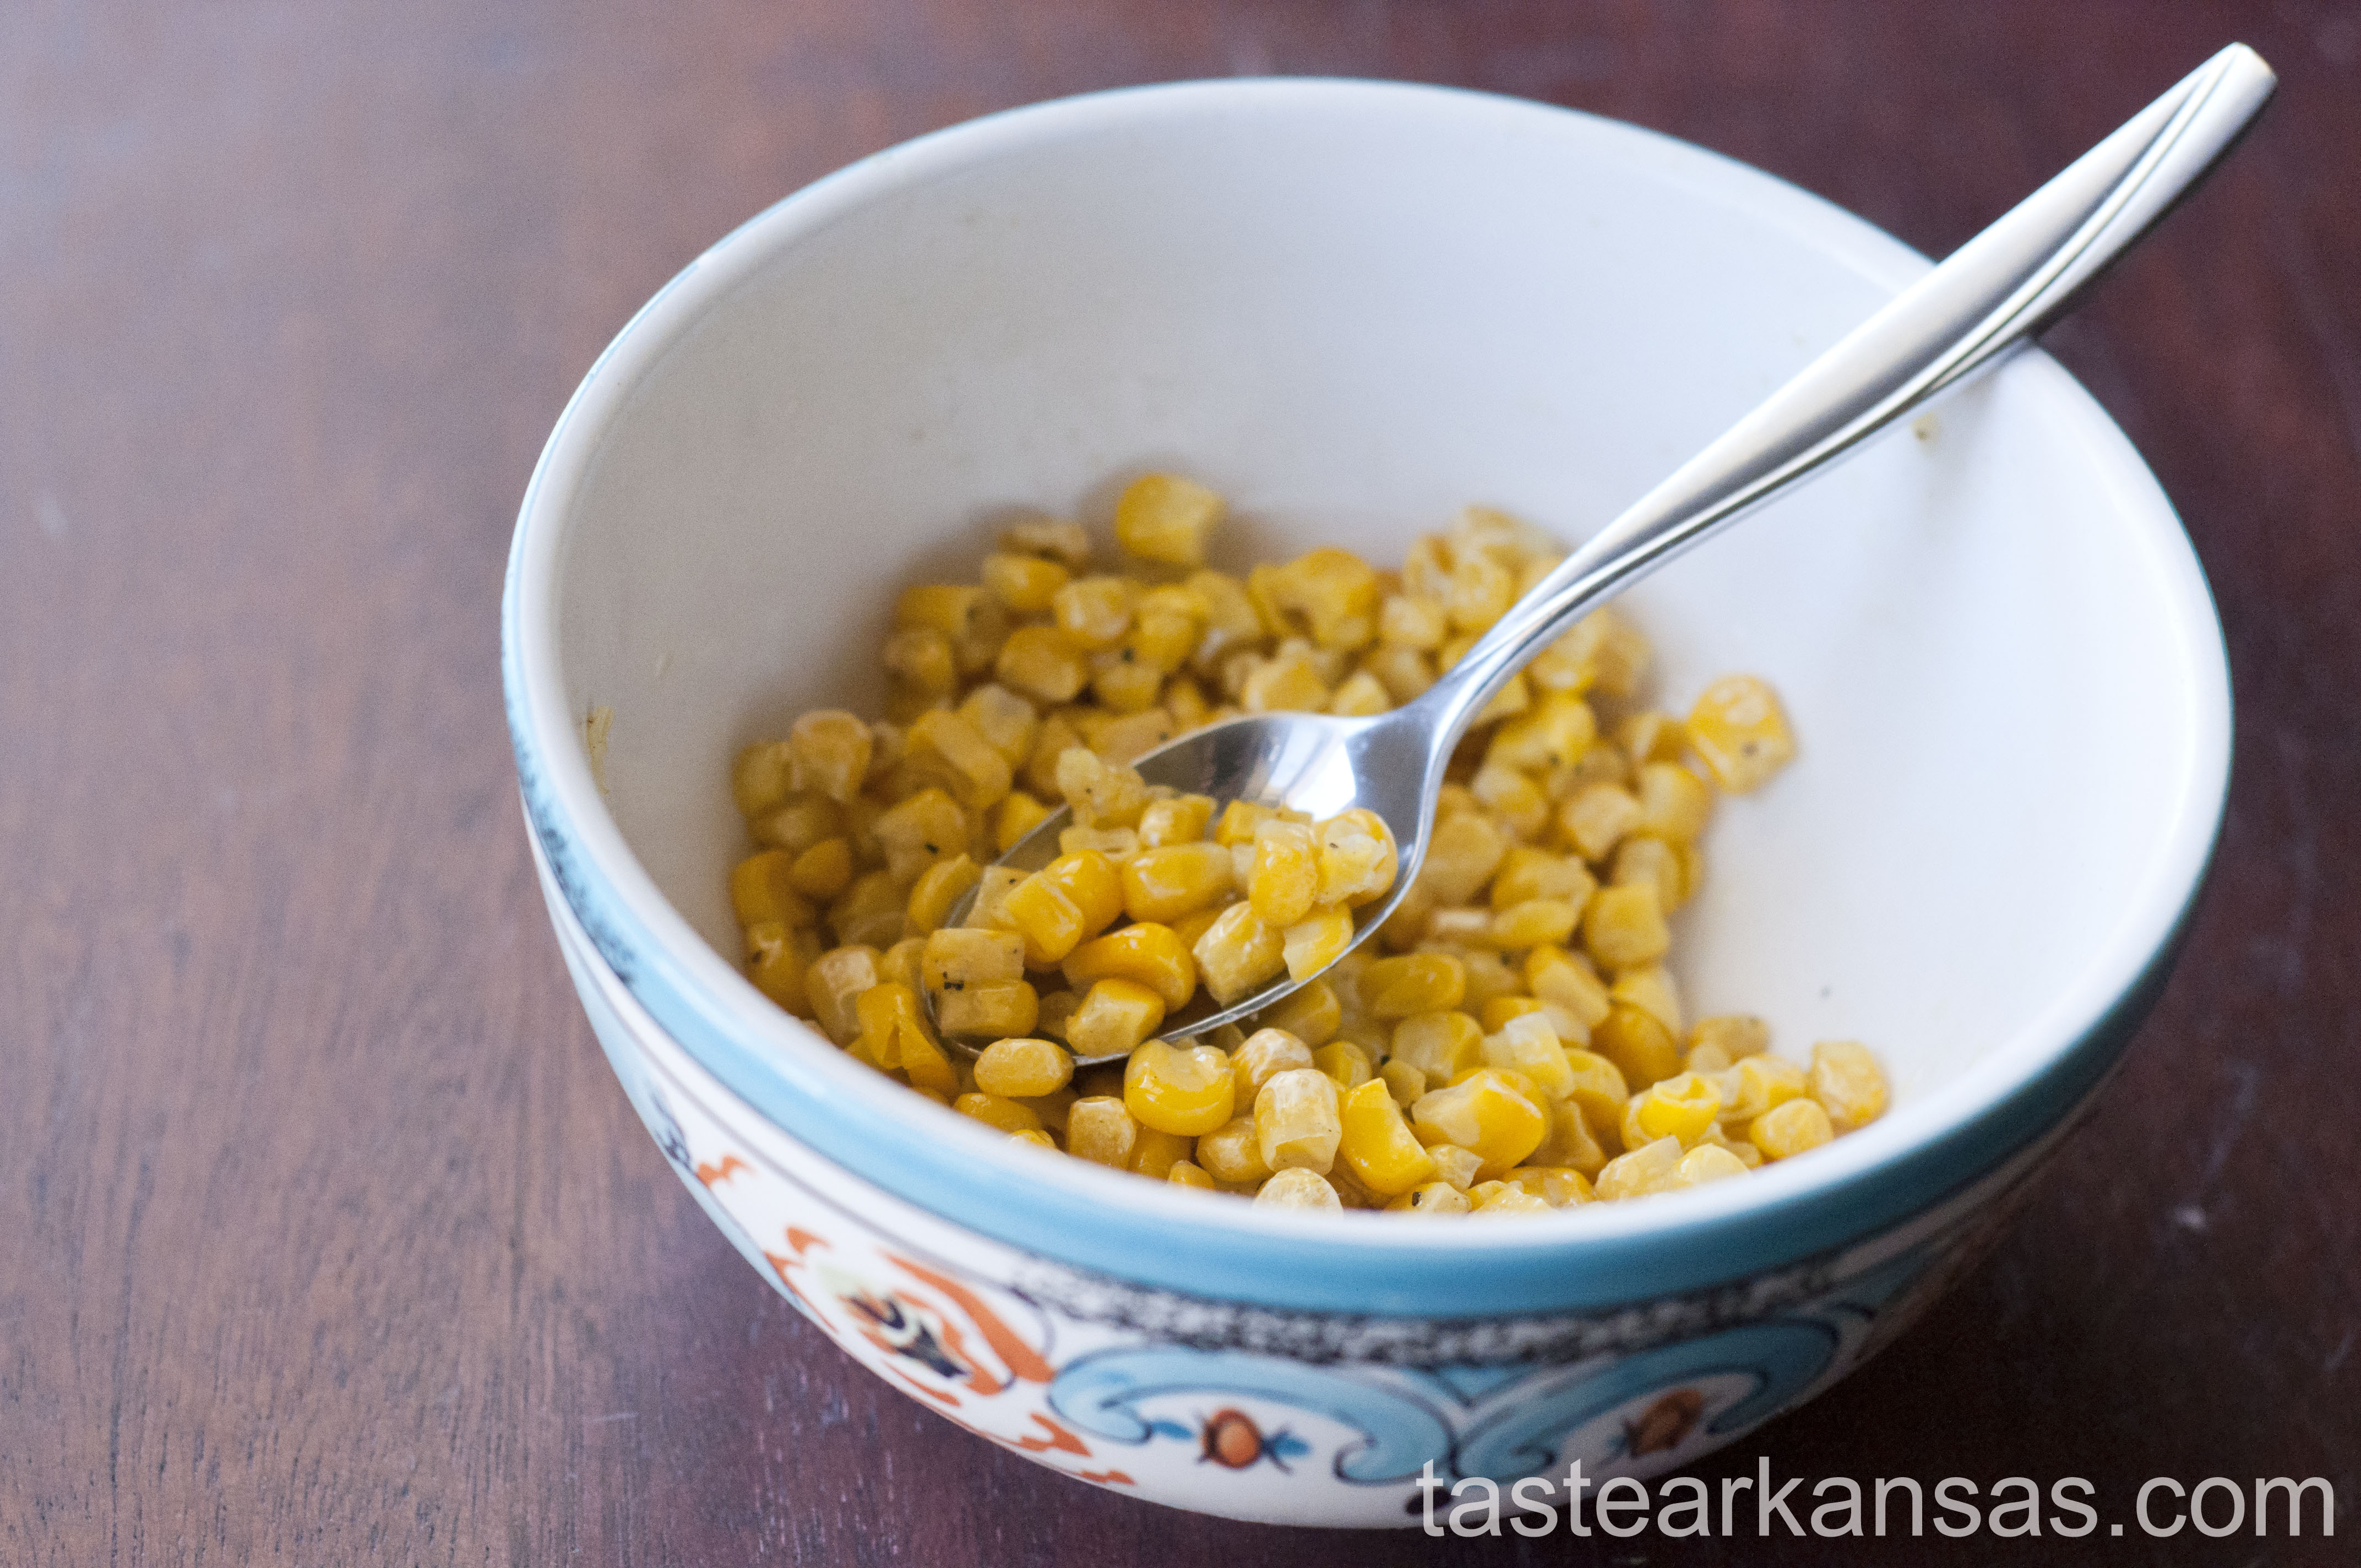 this is an image of a bowl of roasted corn